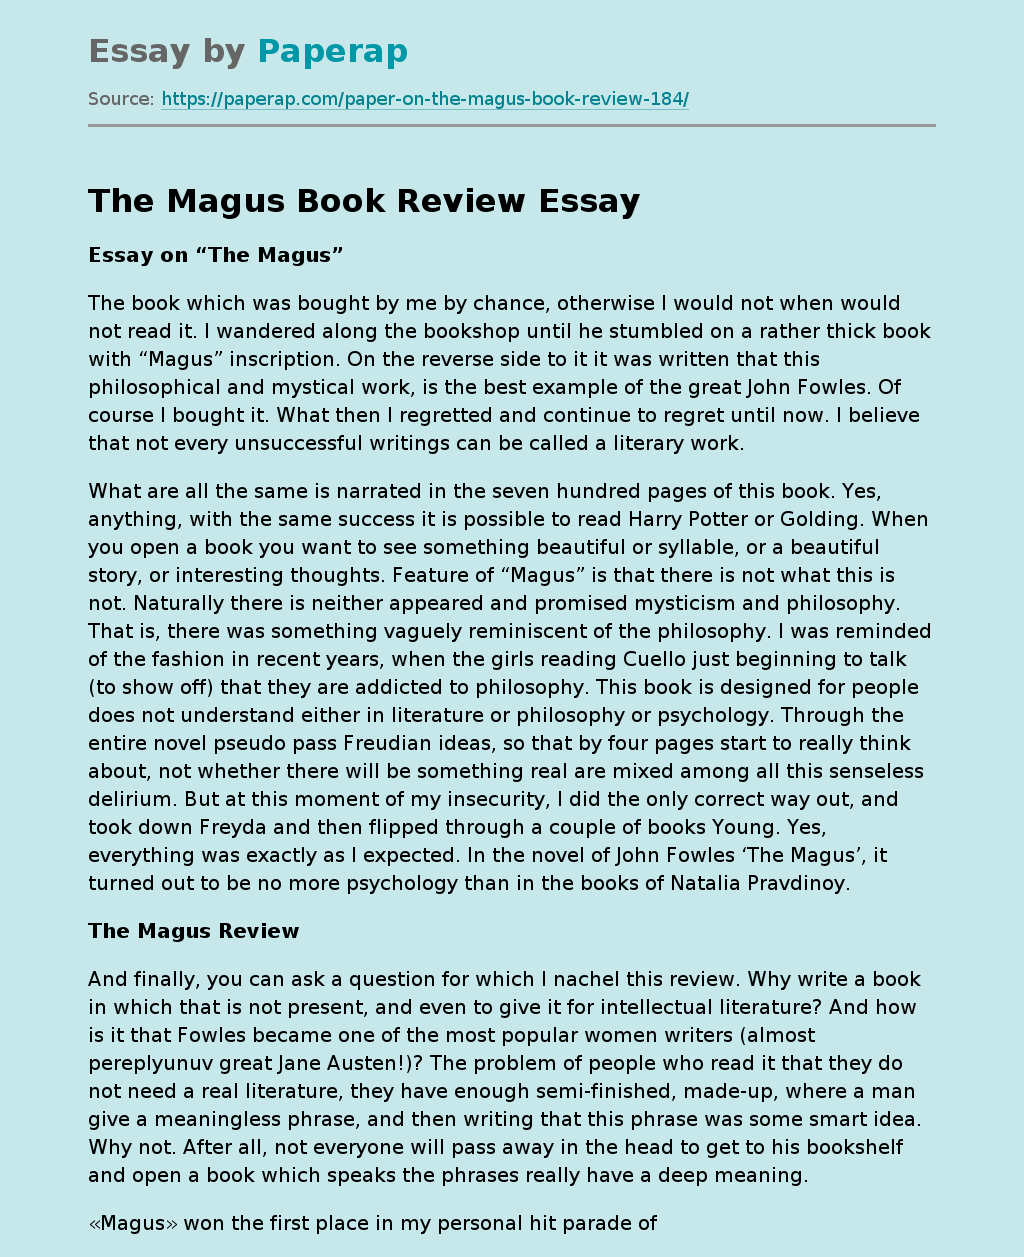 The Magus: A Philosophical and Mystical Masterpiece